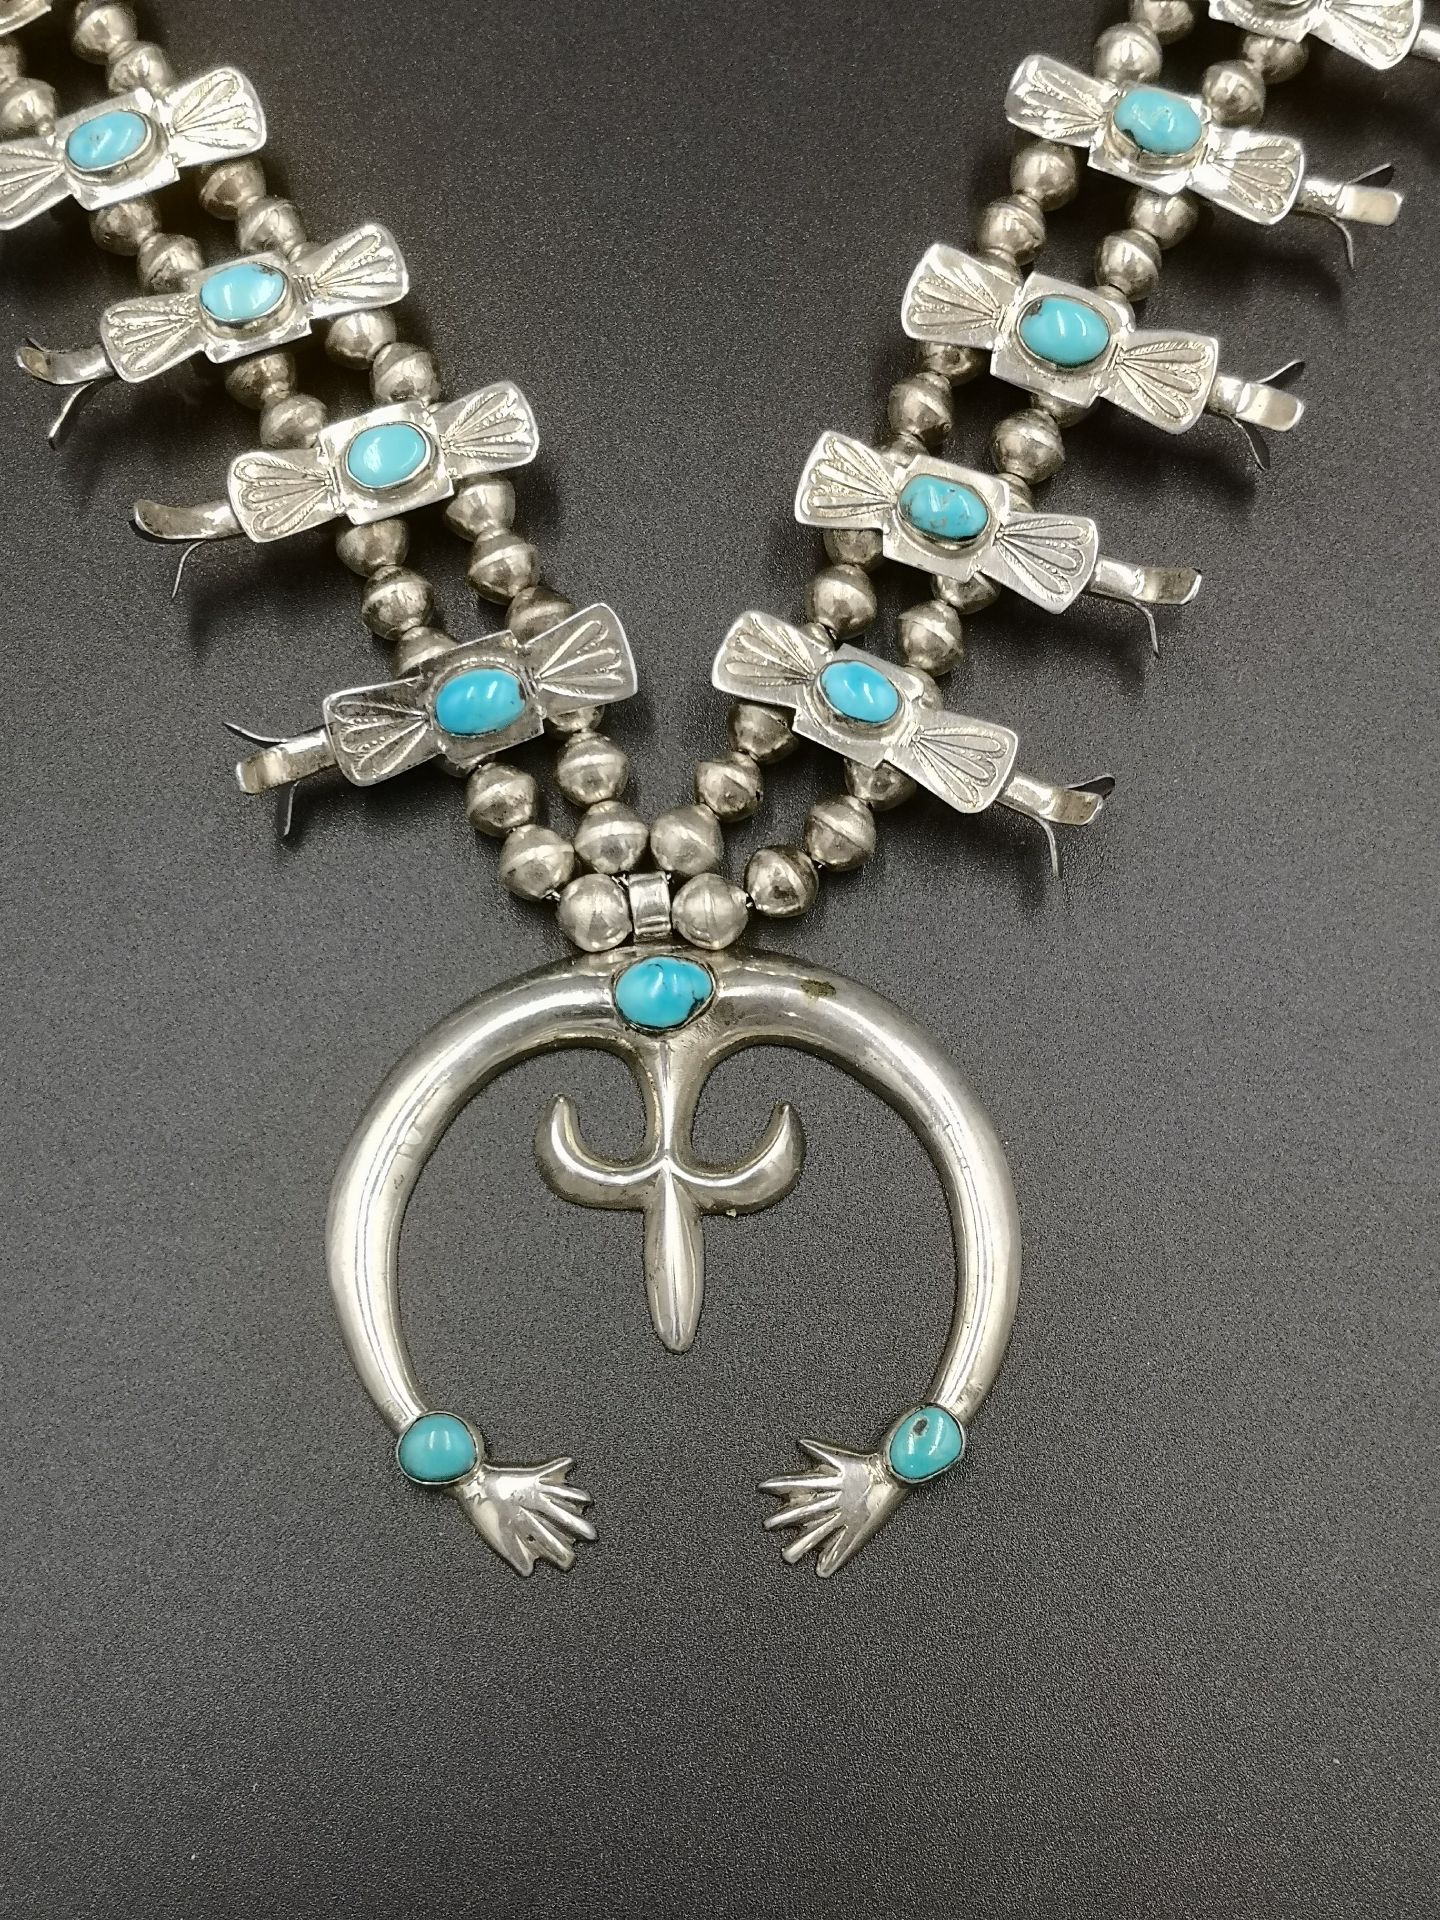 Fred Harvey silver and turquoise 'squash blossom' necklace - Image 4 of 6